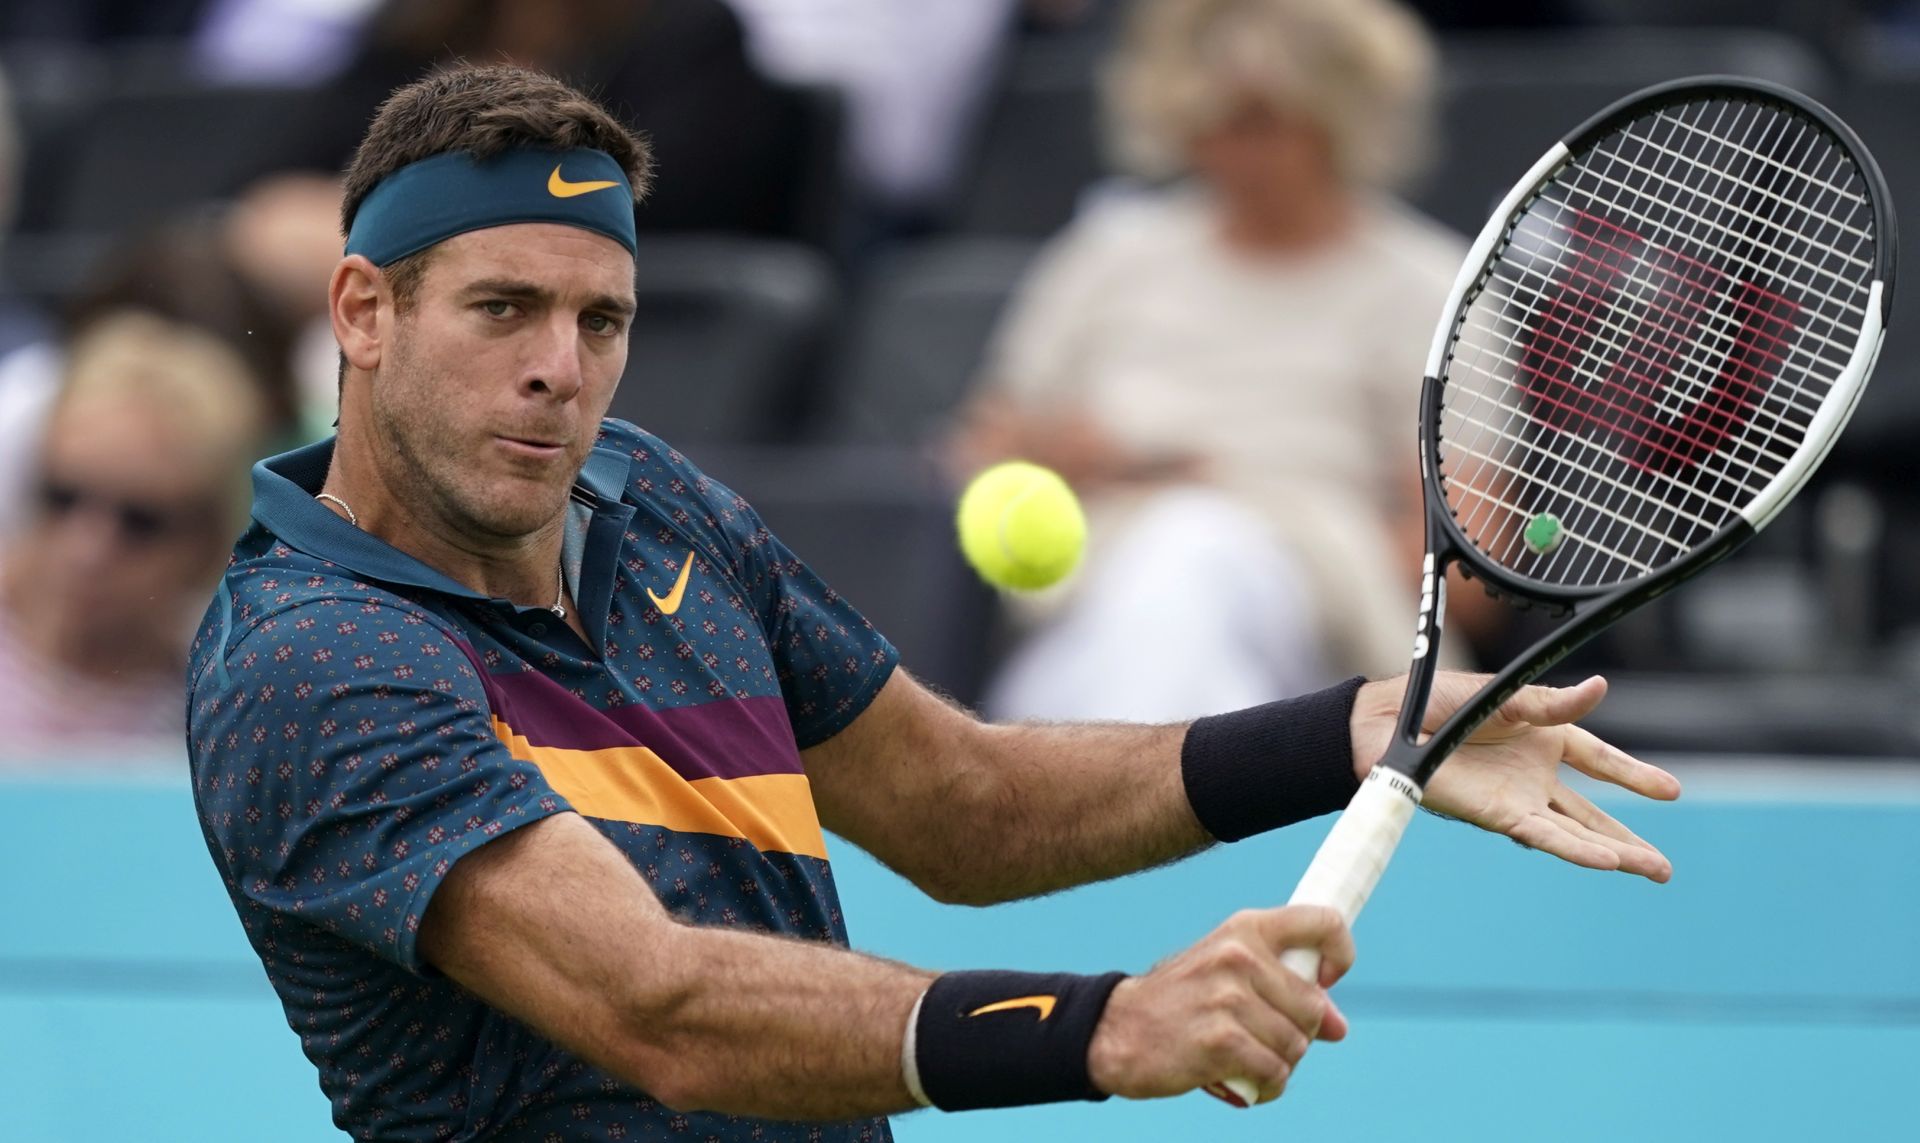 epa07657961 Argentina's Juan Martin del Potro serves to Canada's Denis Shapovalov during their round 32 match at the Fever Tree Championship at Queen's Club in London, Britain, 19 June 2019. The tournament runs from 17th June till 23 June 2019.  EPA/WILL OLIVER